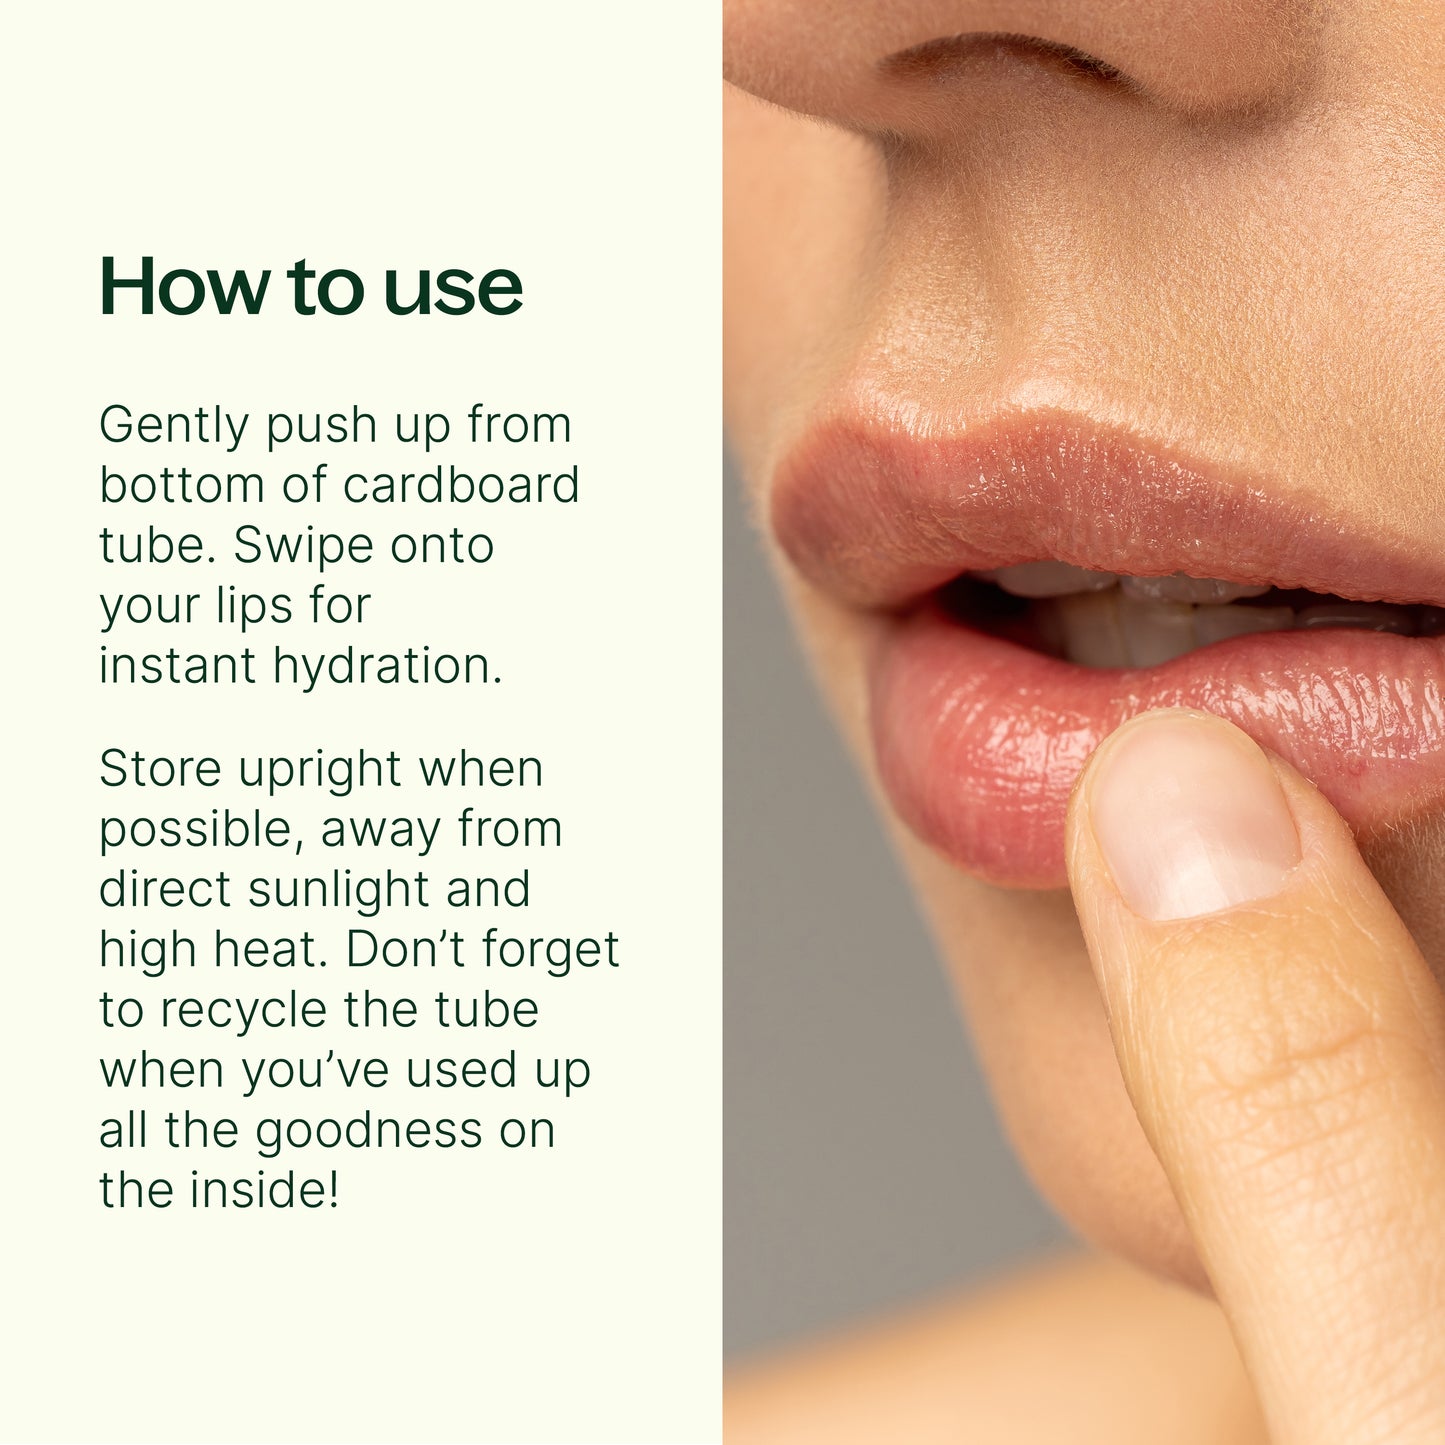 How to use: gently push up from bottom of cardboard tube. Swipe lips for instant hydration. Store upright when possible away from direct sunlight and high heat. 